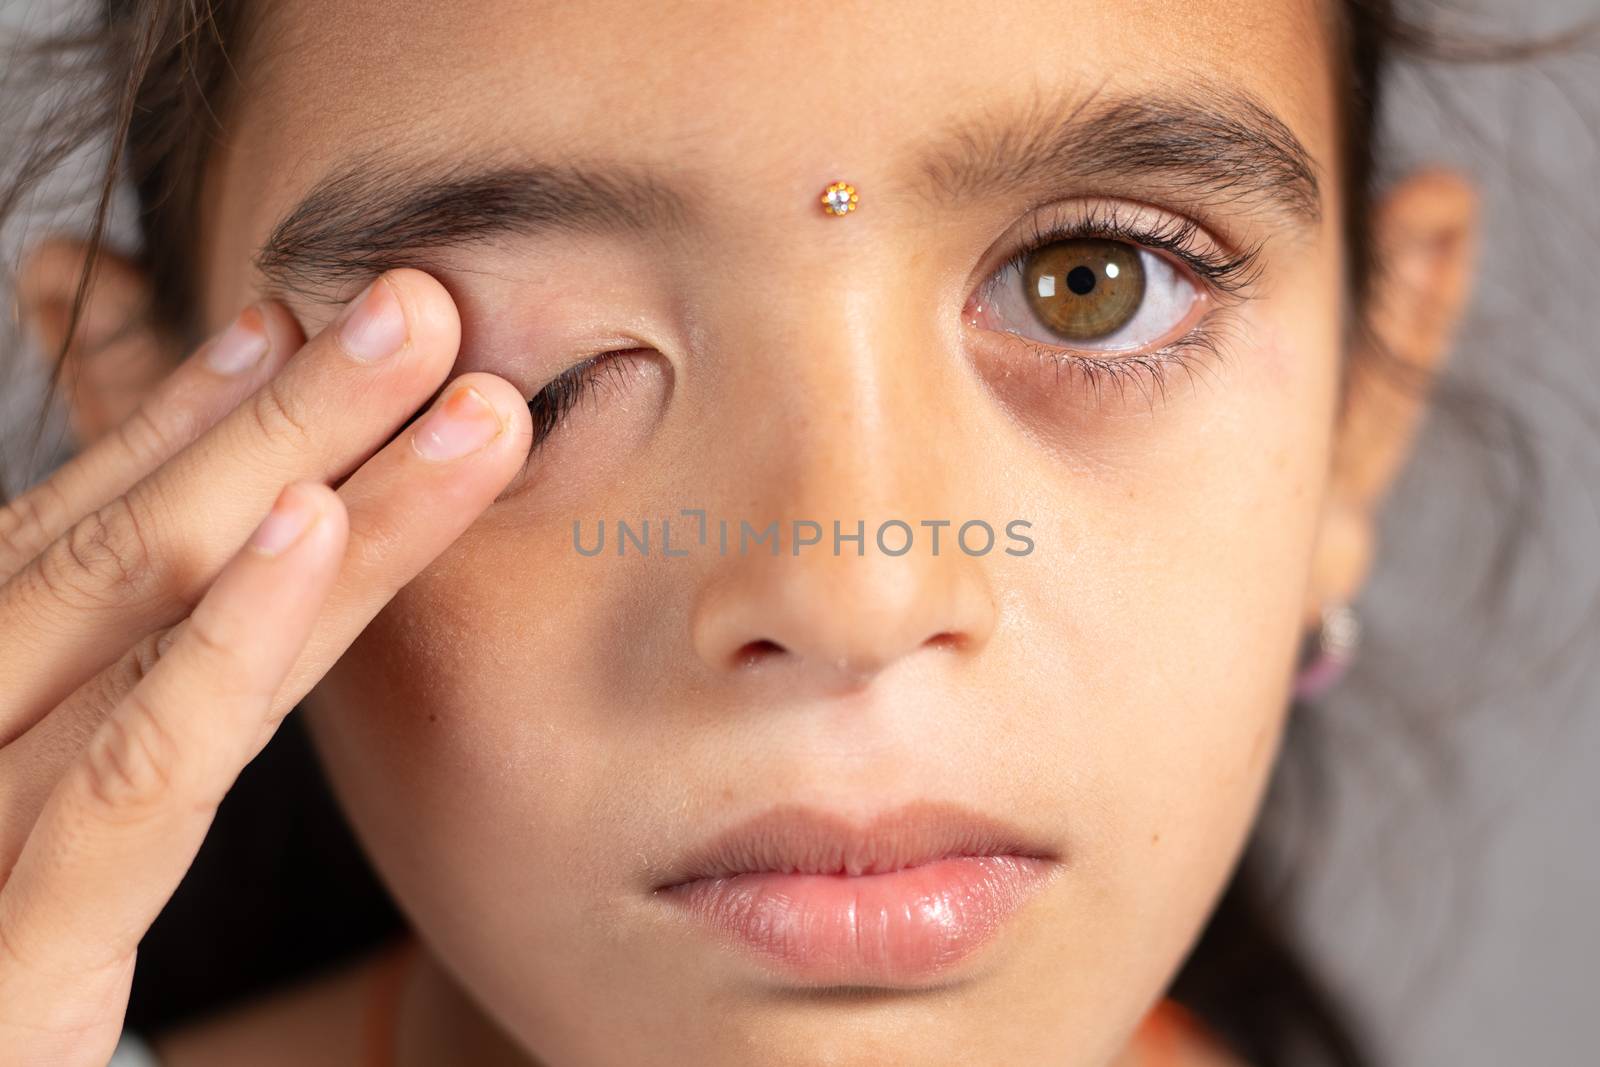 Extreme close up of child rubbing her eyes - concept showing to prevent and Avoid touching your eyes. Protect from COVID-19 or coronavirus infection or outbreak - Don t Touch Your eyes. by lakshmiprasad.maski@gmai.com